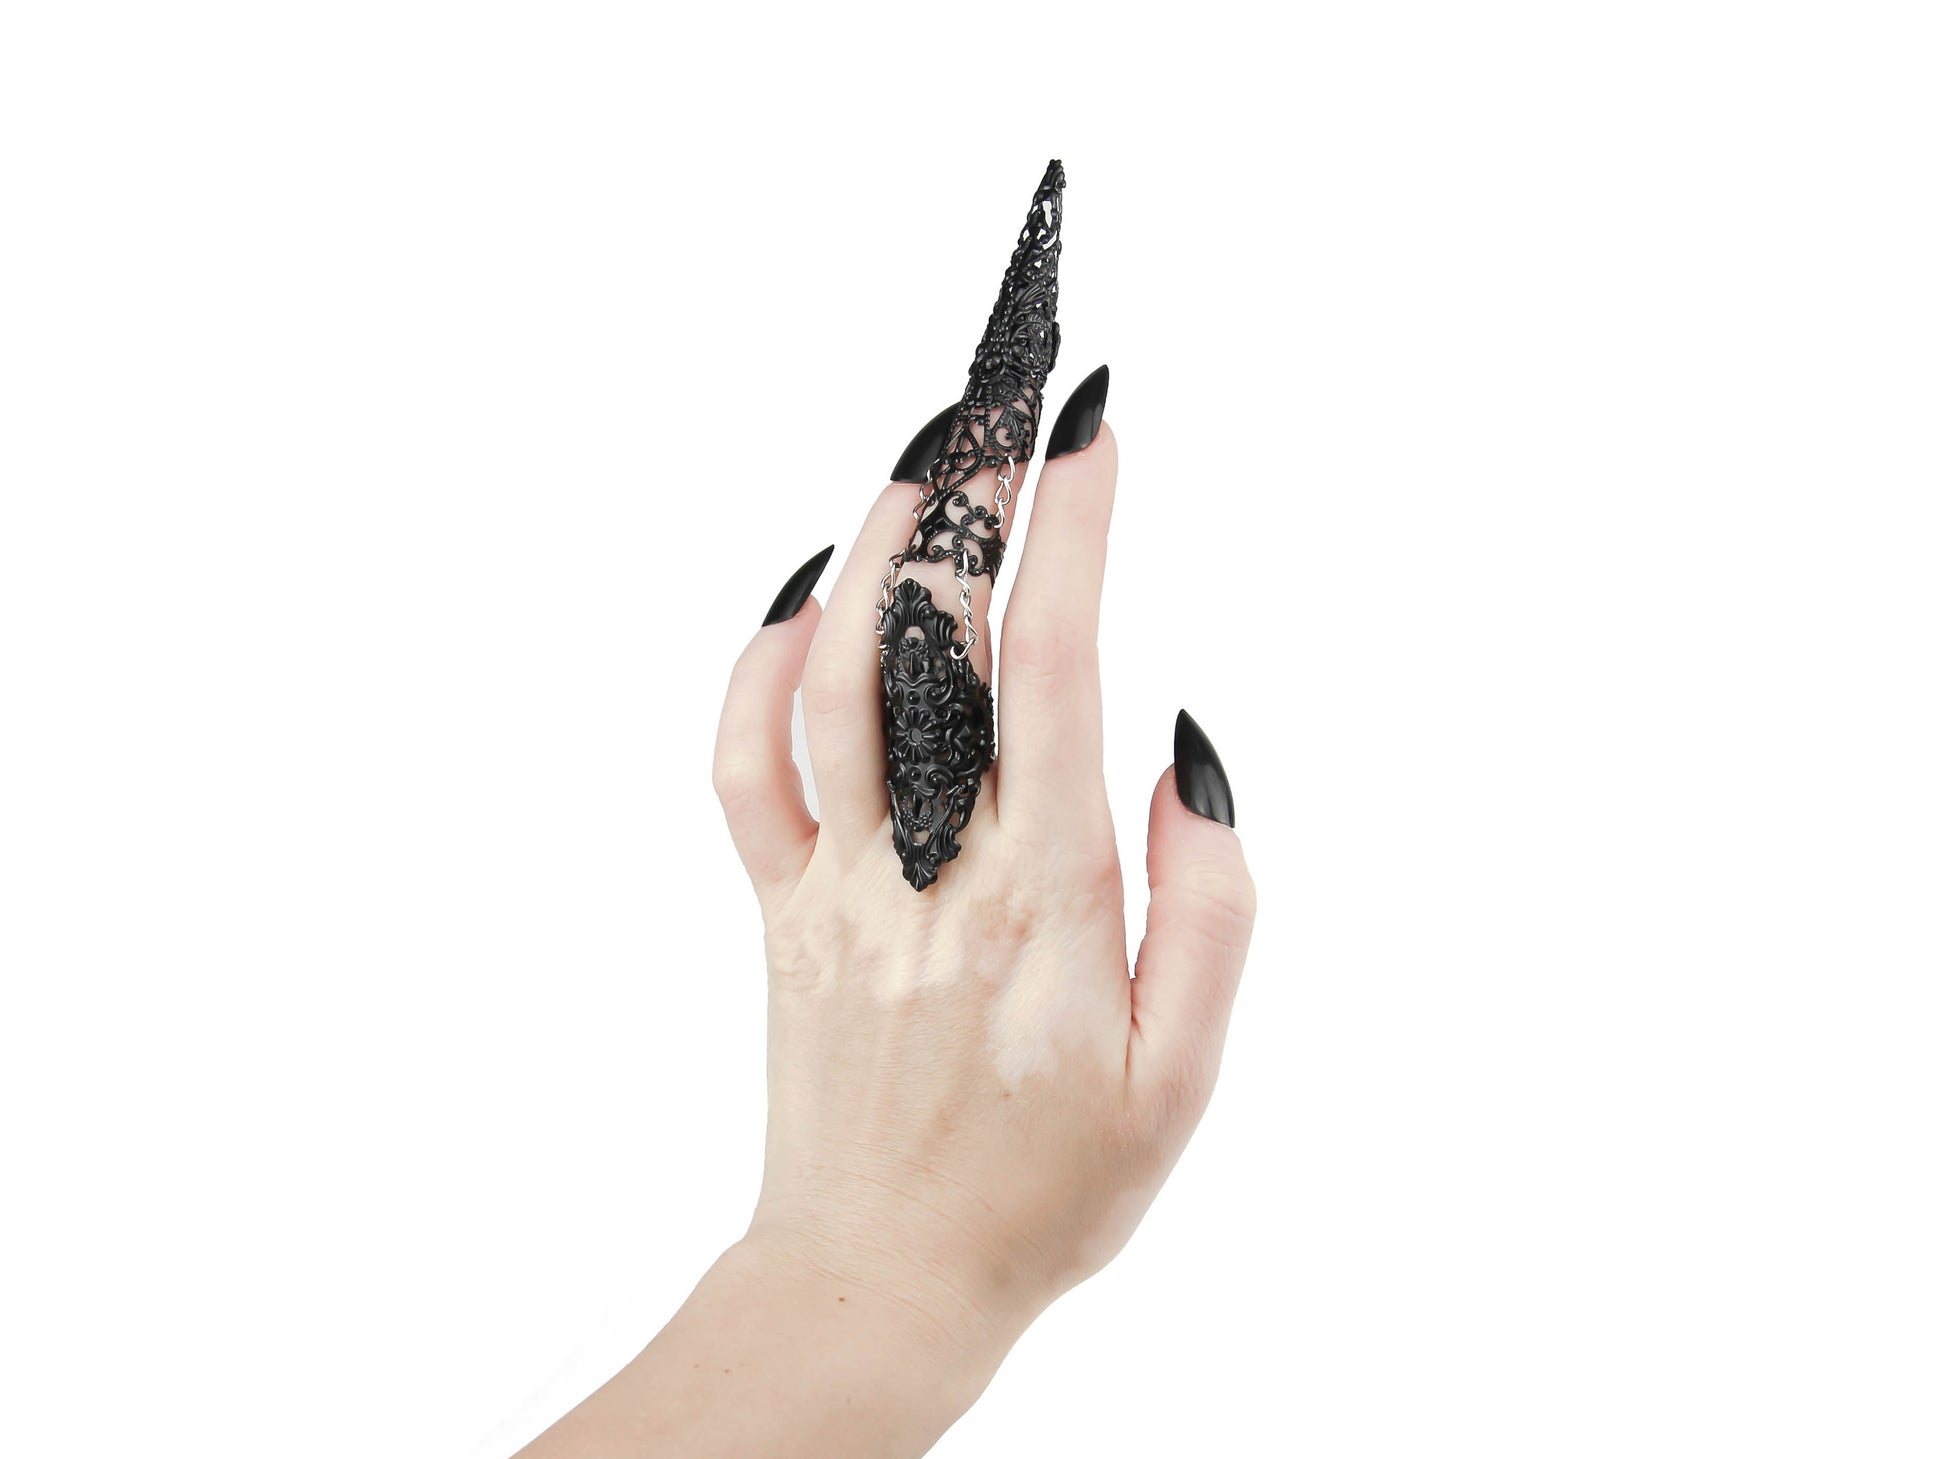 Myril Jewels presents an exquisite gothic black full finger ring, featuring an intricate lace-like design with a long claw, perfect for adding a touch of dark avant-garde to any outfit.